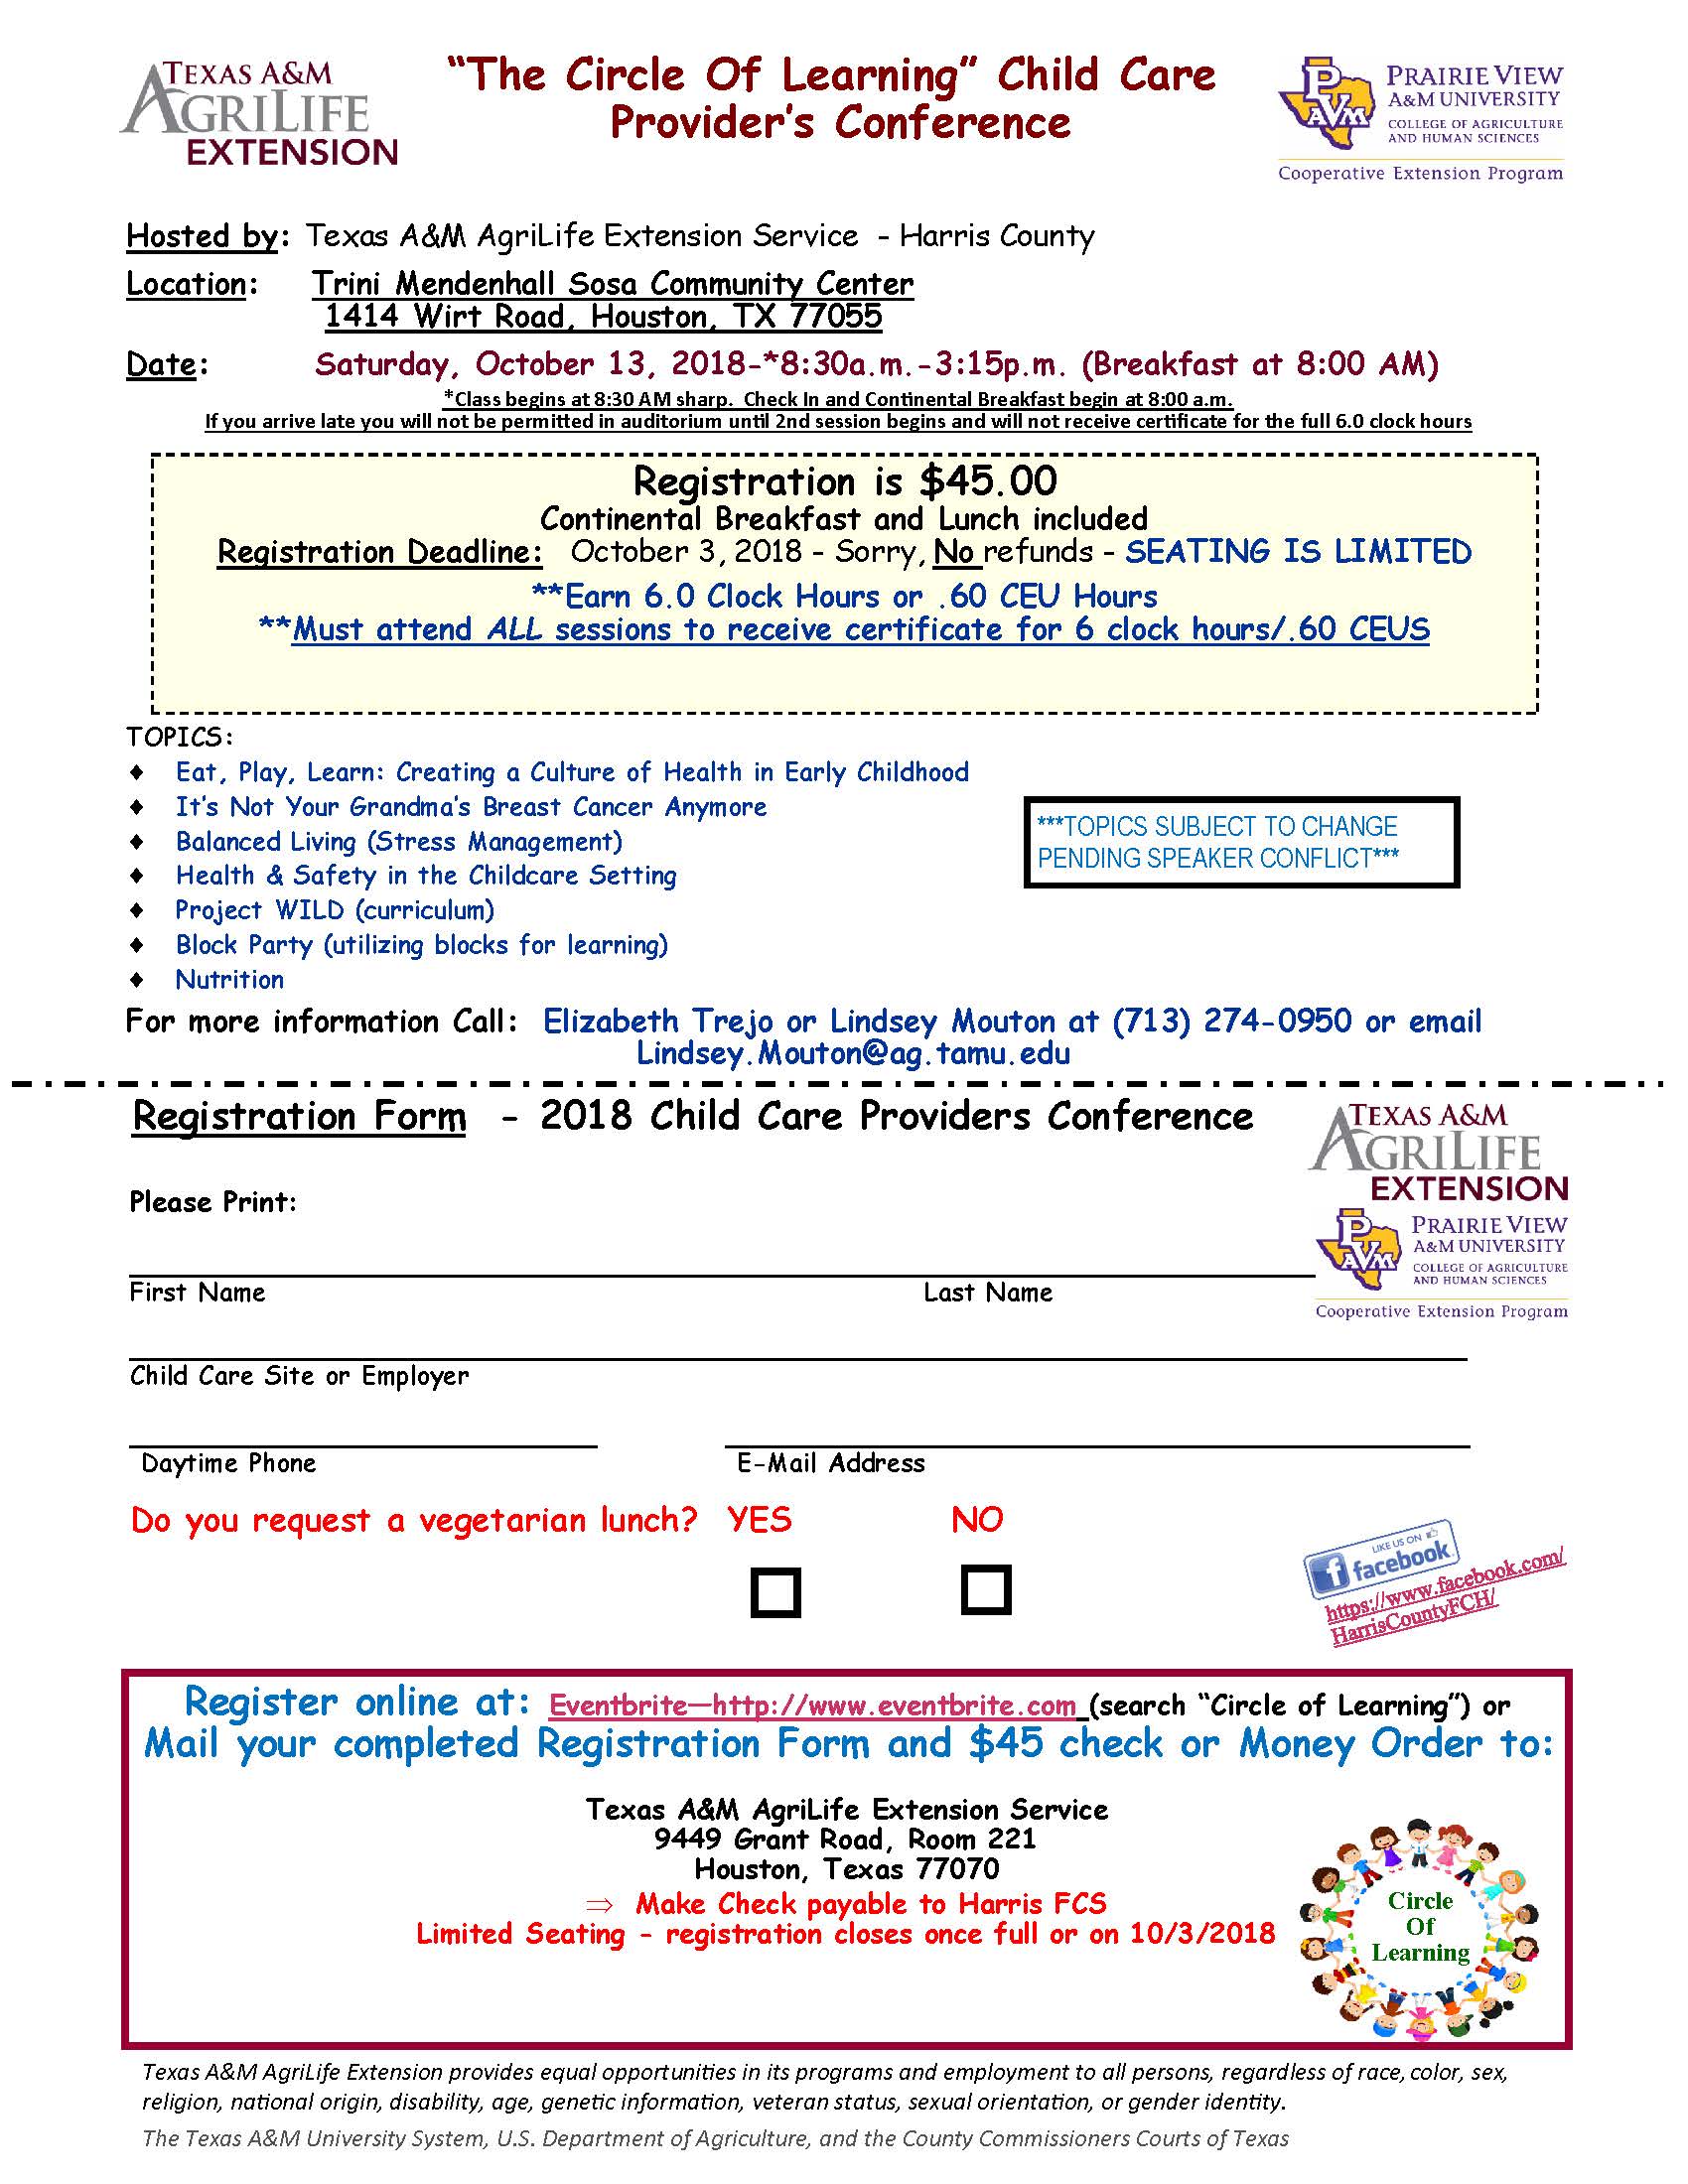 “The Circle of Learning” Child Care Provider’s Conference is being offered on Saturday, October 13, 2018. Child care directors, assistant directors & providers are invited join us for an excellent opportunity to the state required 6.0 clock hours or .6 CEU hours hosted by Texas AgriLife Extension Service--Harris County. It will be held at Trini Mendenhall Sosa Community Center, 1414 Wirt Rd, Houston, Tx 77055. The conference starts at 8:30 am SHARP to 3:15 pm. Check-in and a continental breakfast begin at 8:00 am. Cost of registration is $45, and the registration deadline is October 3, 2018 or when full. NO REFUNDS GIVEN as seating is limited. If you arrive after 8:30, you will not be permitted into the auditorium until the second session and will not receive the certificate for the 6 clock hours. Topics include (subject to change pending speaker schedules) Eat, Play, Learn: Creating a Culture of Health in Early Childhood, It’s Not Your Grandma’s Breast Cancer Anymore, Balanced Living (Stress Management), Health & Safety in the Childcare Setting, Project WILD (curriculum), Block Party (utilizing blocks for learning) You can register online at https://www.eventbrite.com/e/the-circle-of-learning-child-care-providers-conference-tickets-49049498370 Or mail the completed registration form and $45 Check or Money Order (made payable to Harris FCS) to: Texas A&M AgriLife Extension Service, 9449 Grant Road, Room 221, Houston, Texas 77070